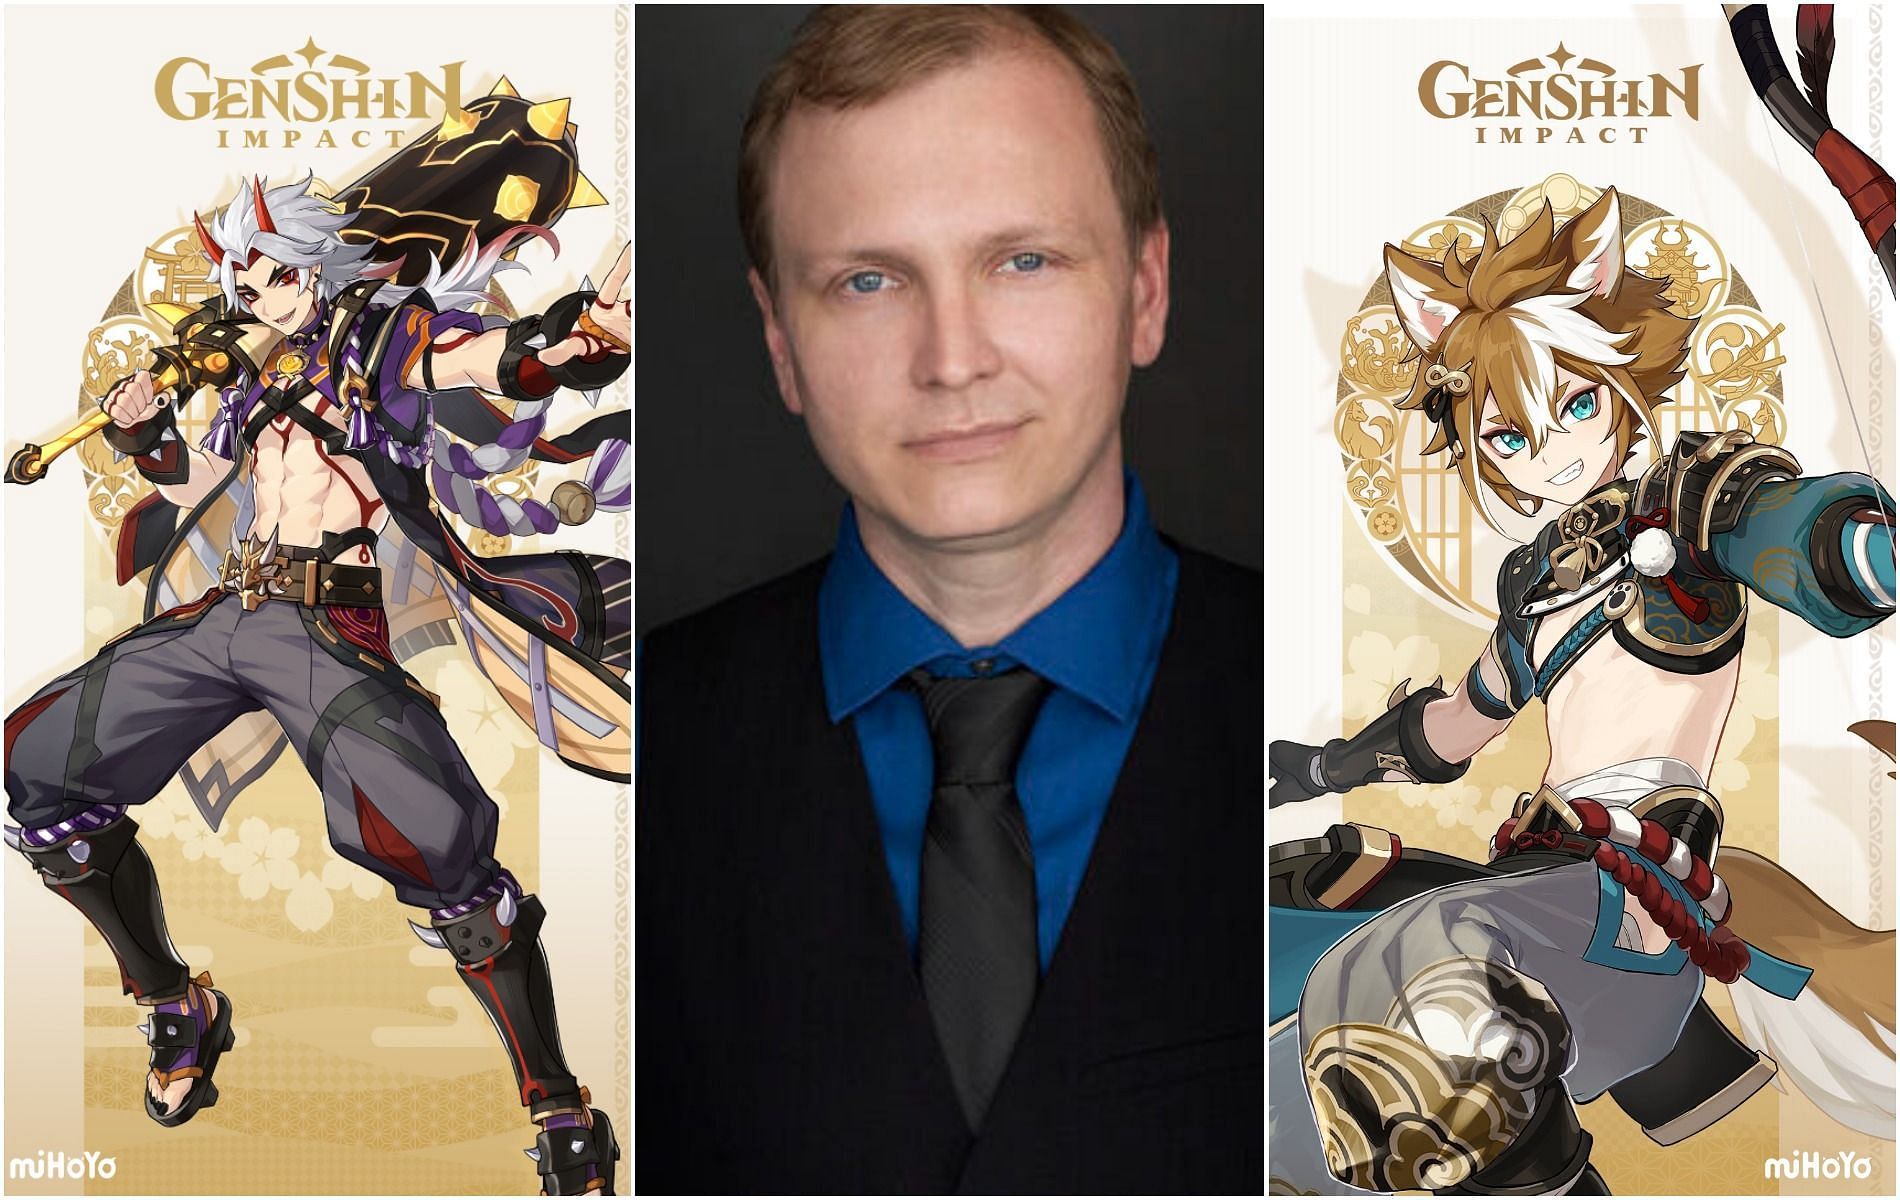 Will Chris Hackney be voicing Itto or Gorou in Genshin Impact? (Images via miHoYo and Christopher Hackney)